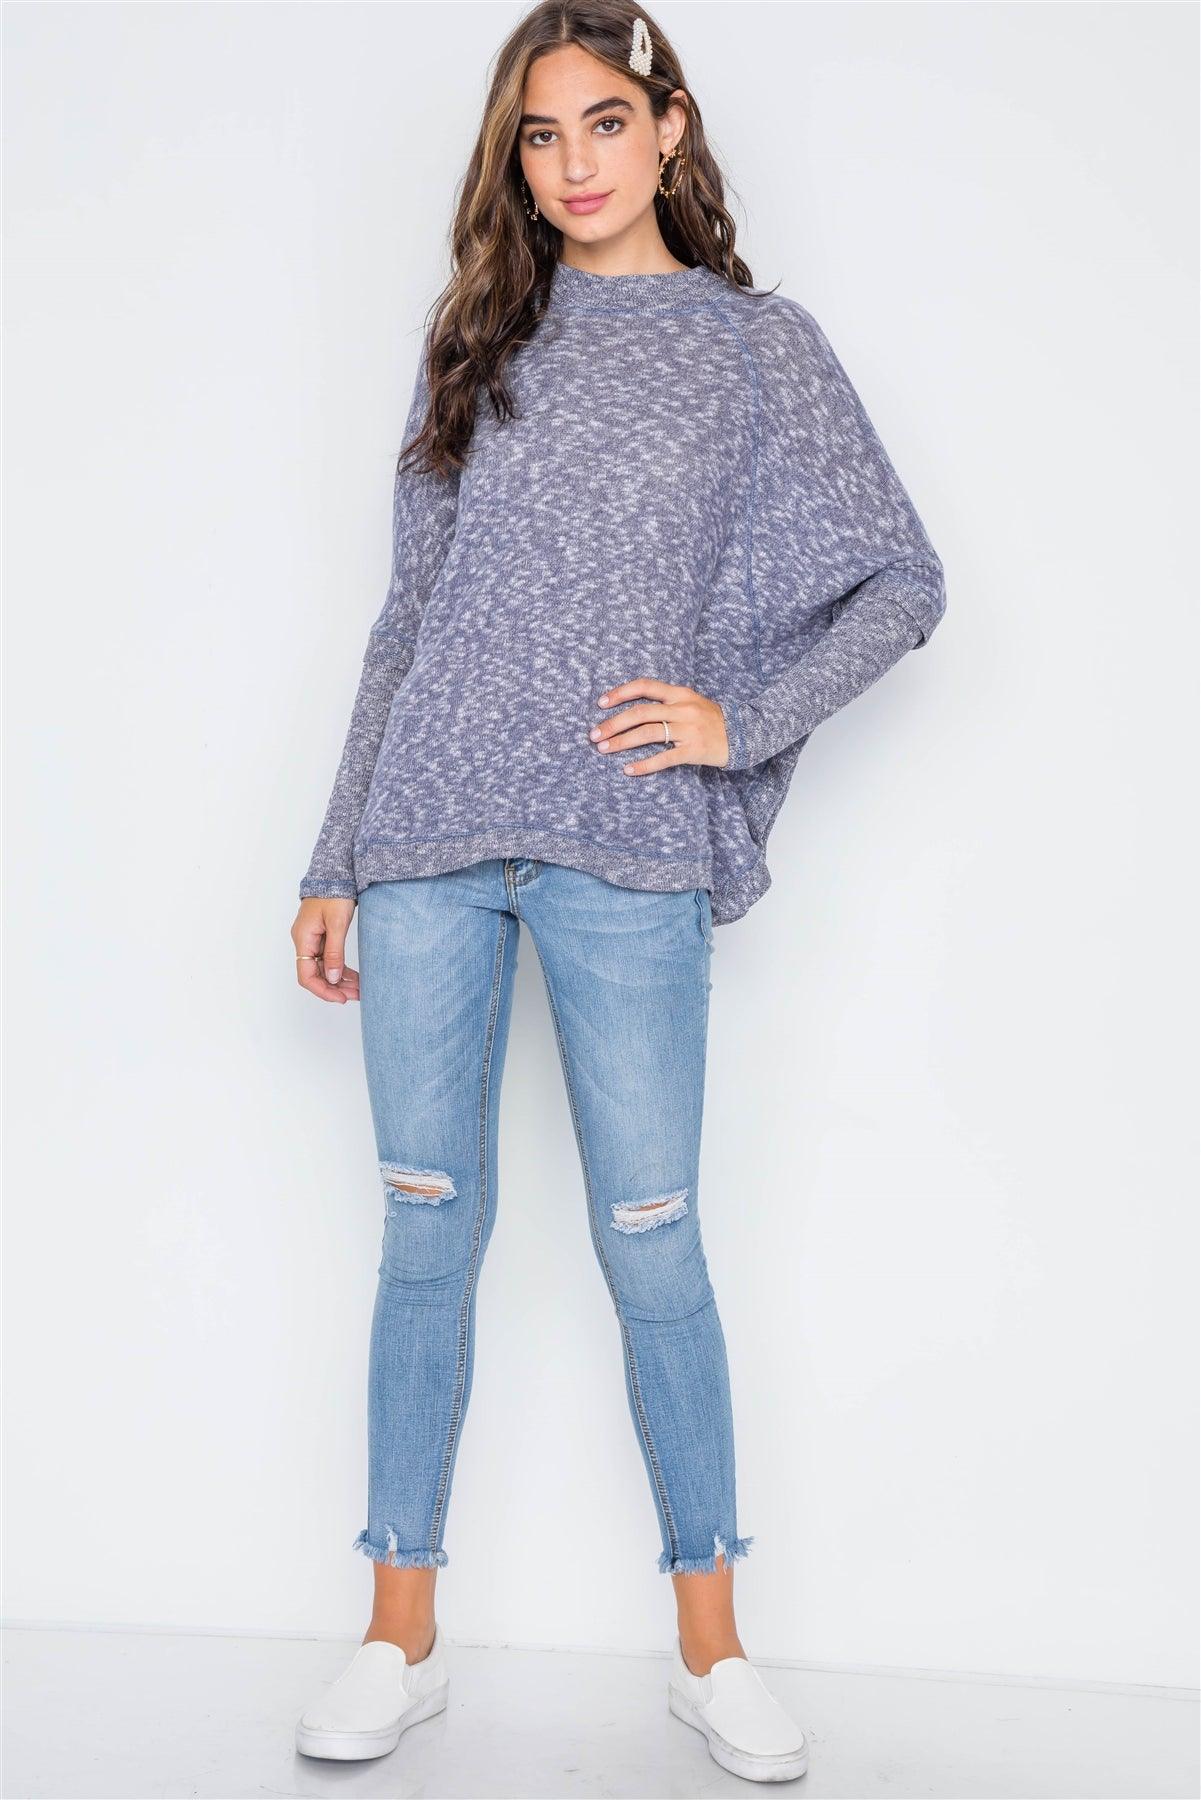 Navy Heathered Dolman Sleeves Knit Sweater Top